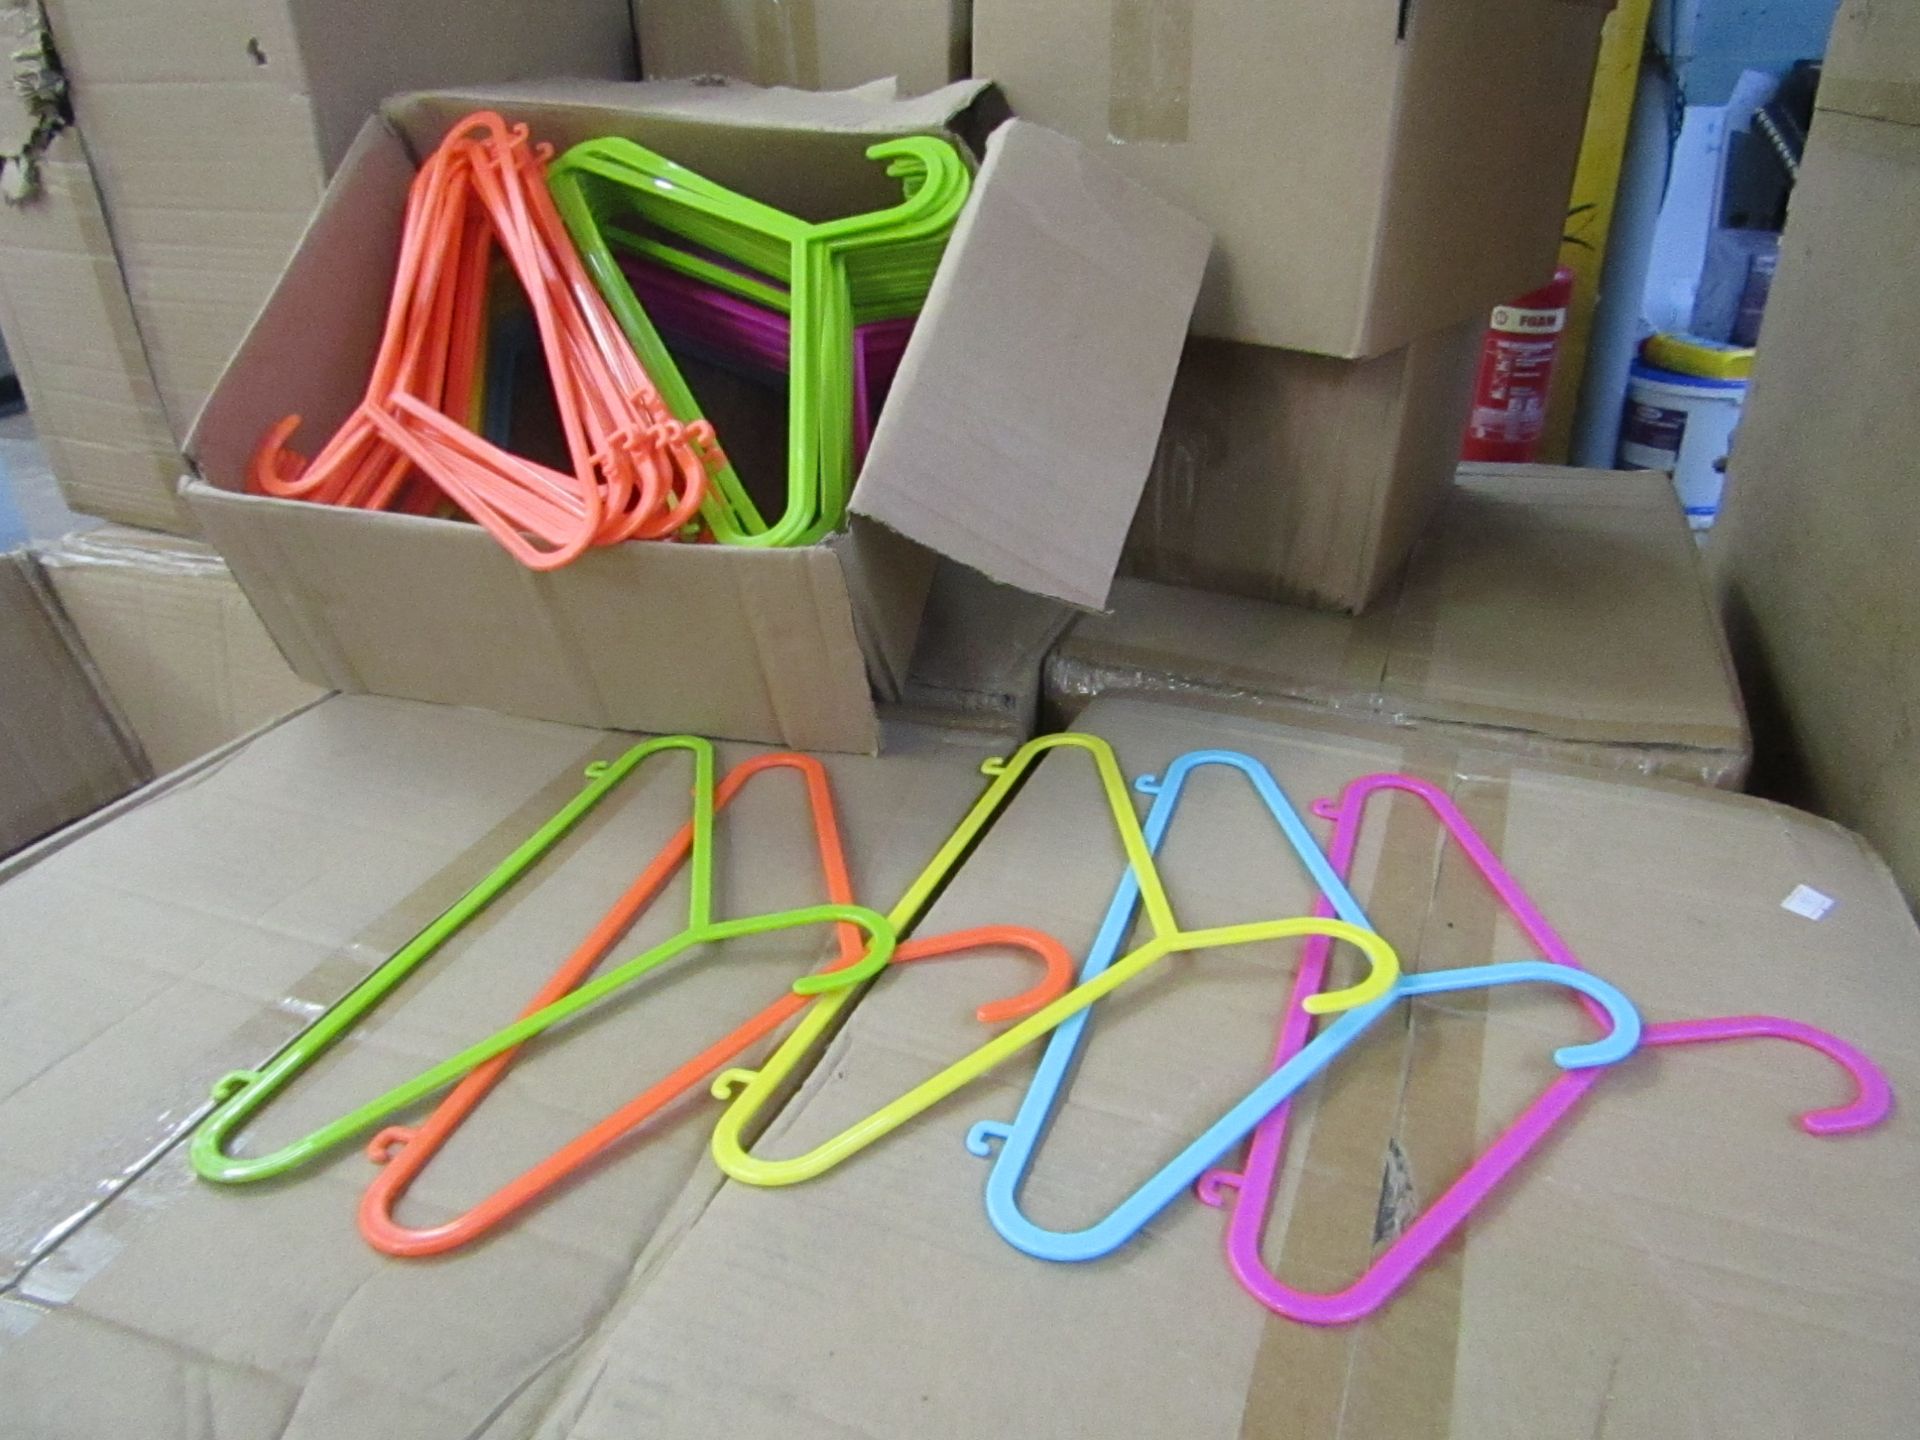 Box of 100 Mixed Bright coloured Children's Clothes Hangers, new